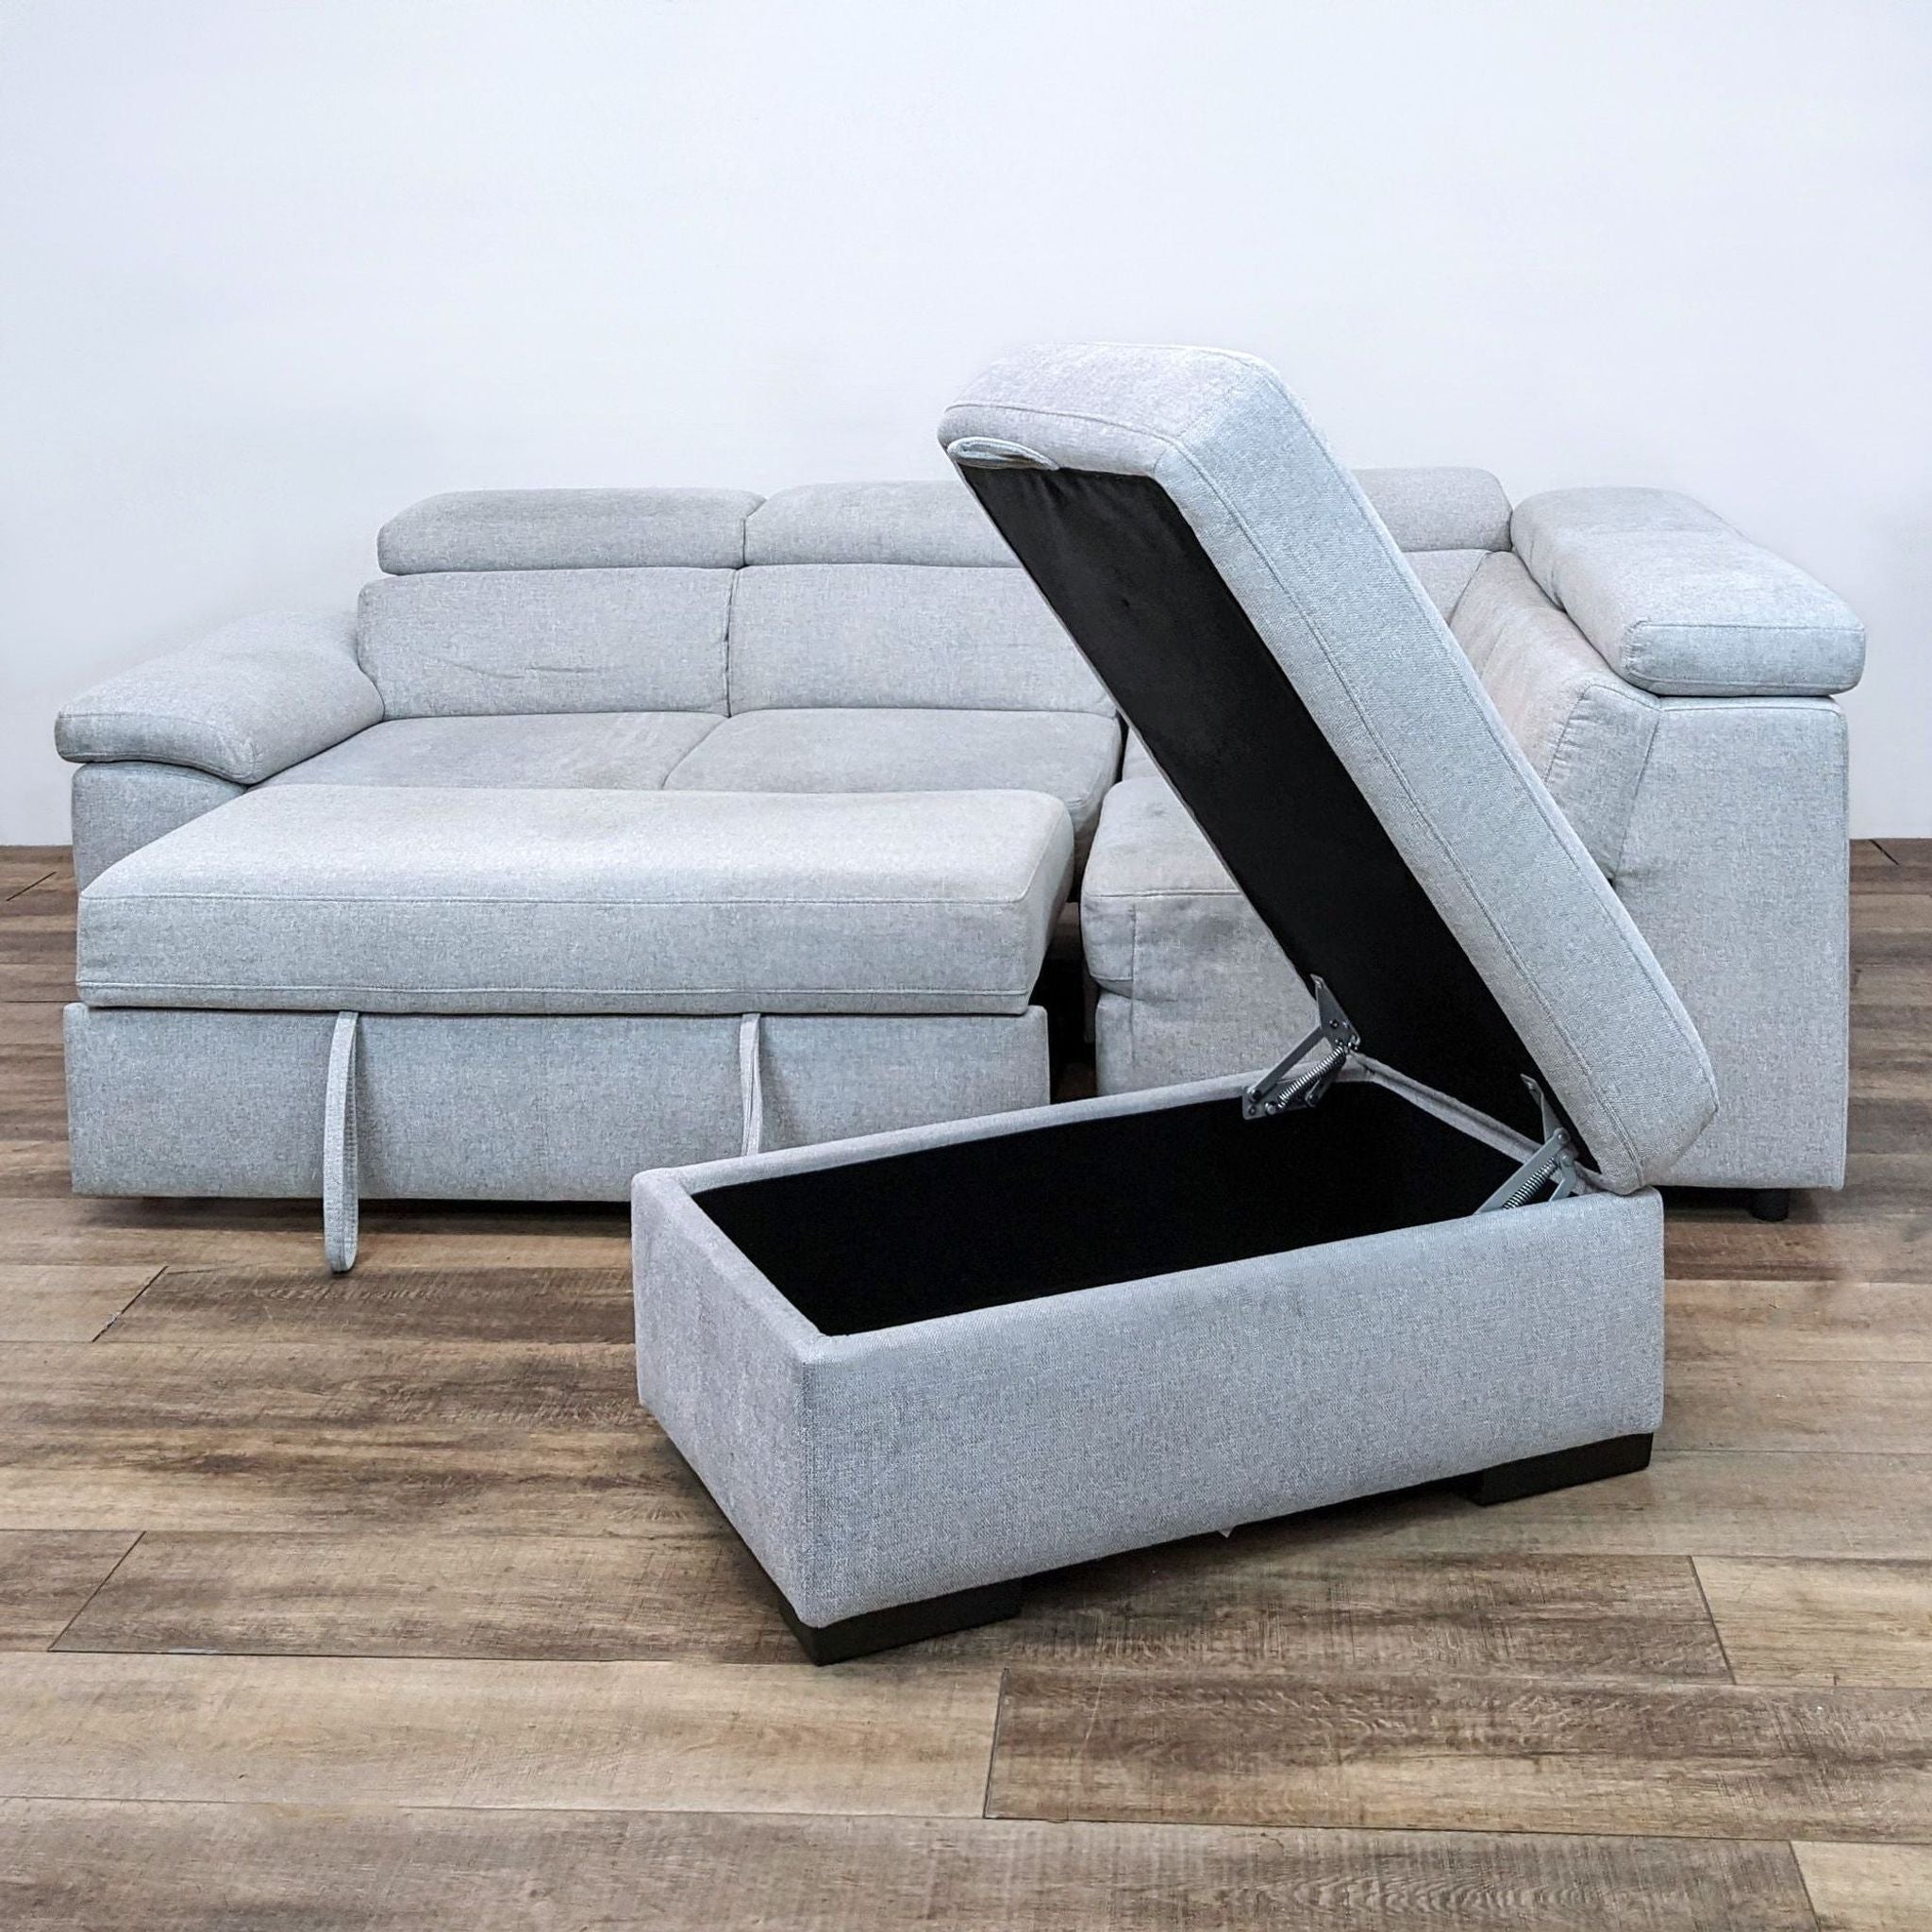 2. Open storage ottoman matching the Reperch light gray sectional, showcasing interior storage space, with the sectional's pull-out chaise visible.